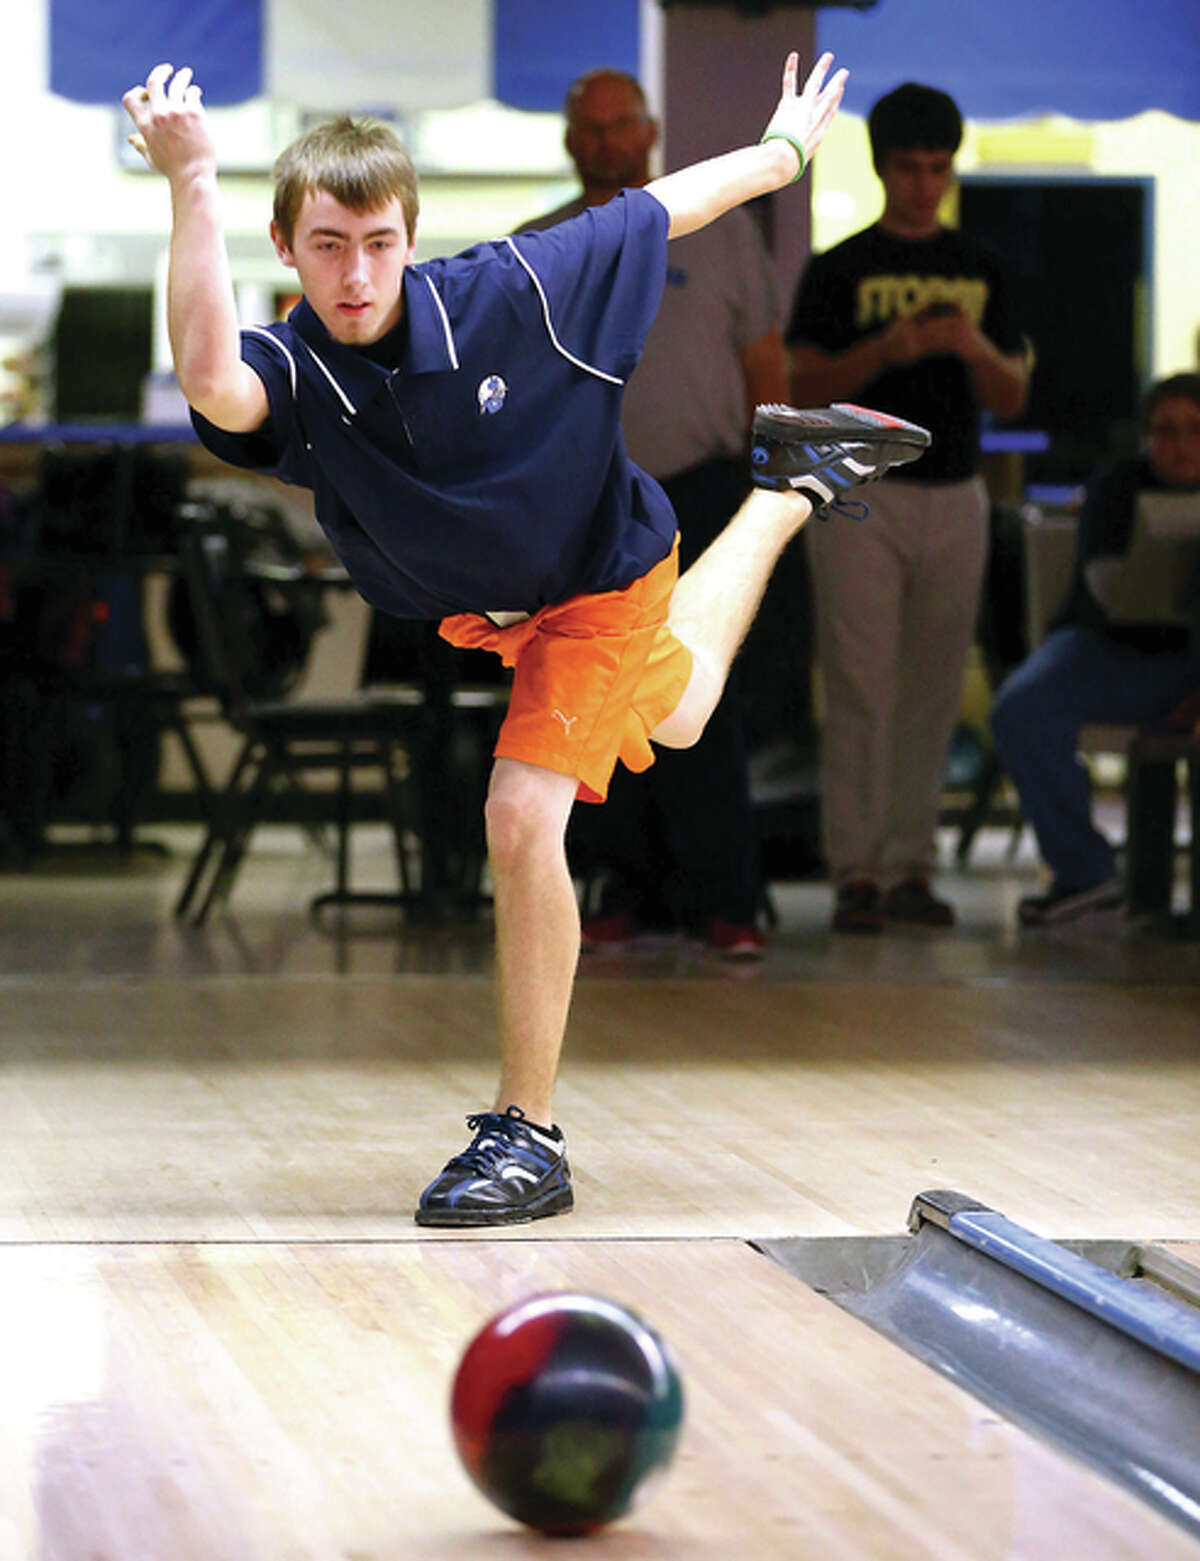 Jersey’s Jacob Freand had 1,343 pins Friday and helped his team advance to Saturday’s finals at the two-day IHSA Boys State Bowling Tournament in O’Fallon. Jeff Gump led Jersey with a 1,366 score.